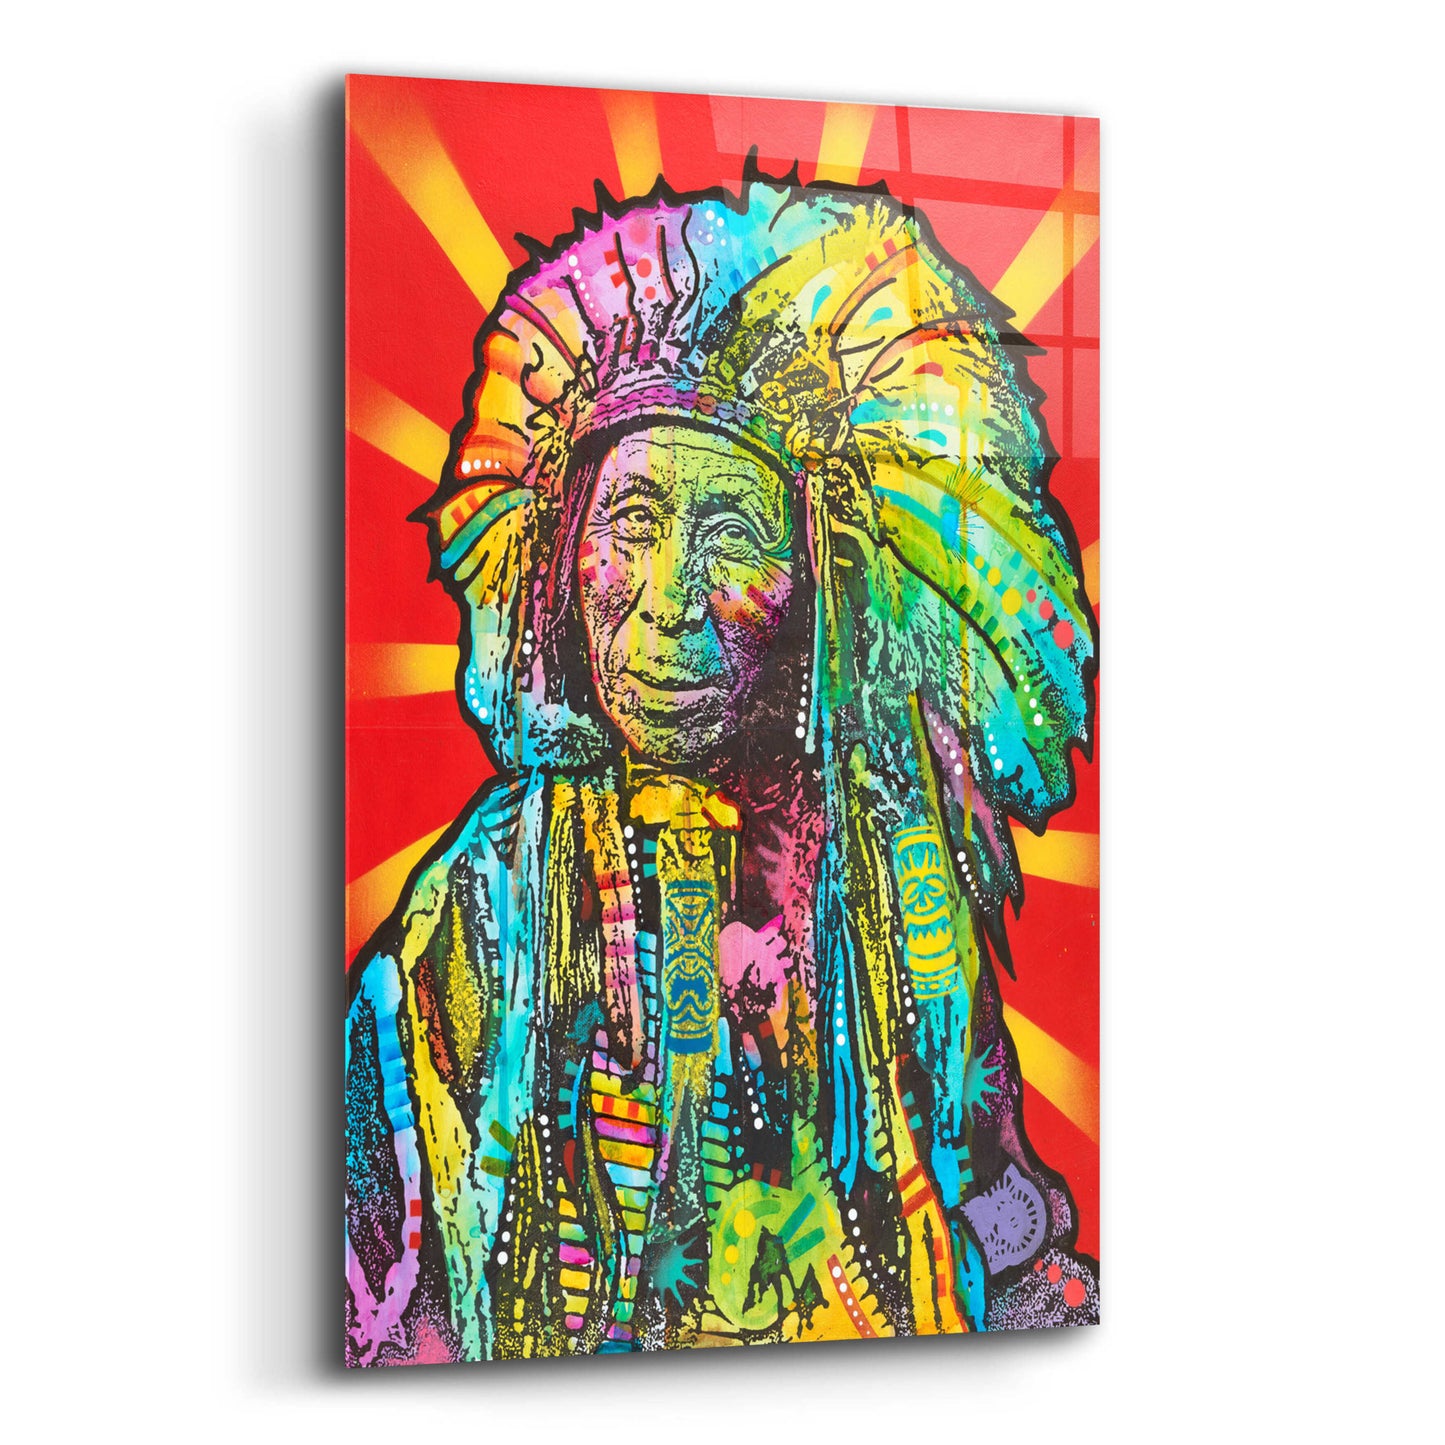 Epic Art 'Native American I' by Dean Russo, Acrylic Glass Wall Art,16x24